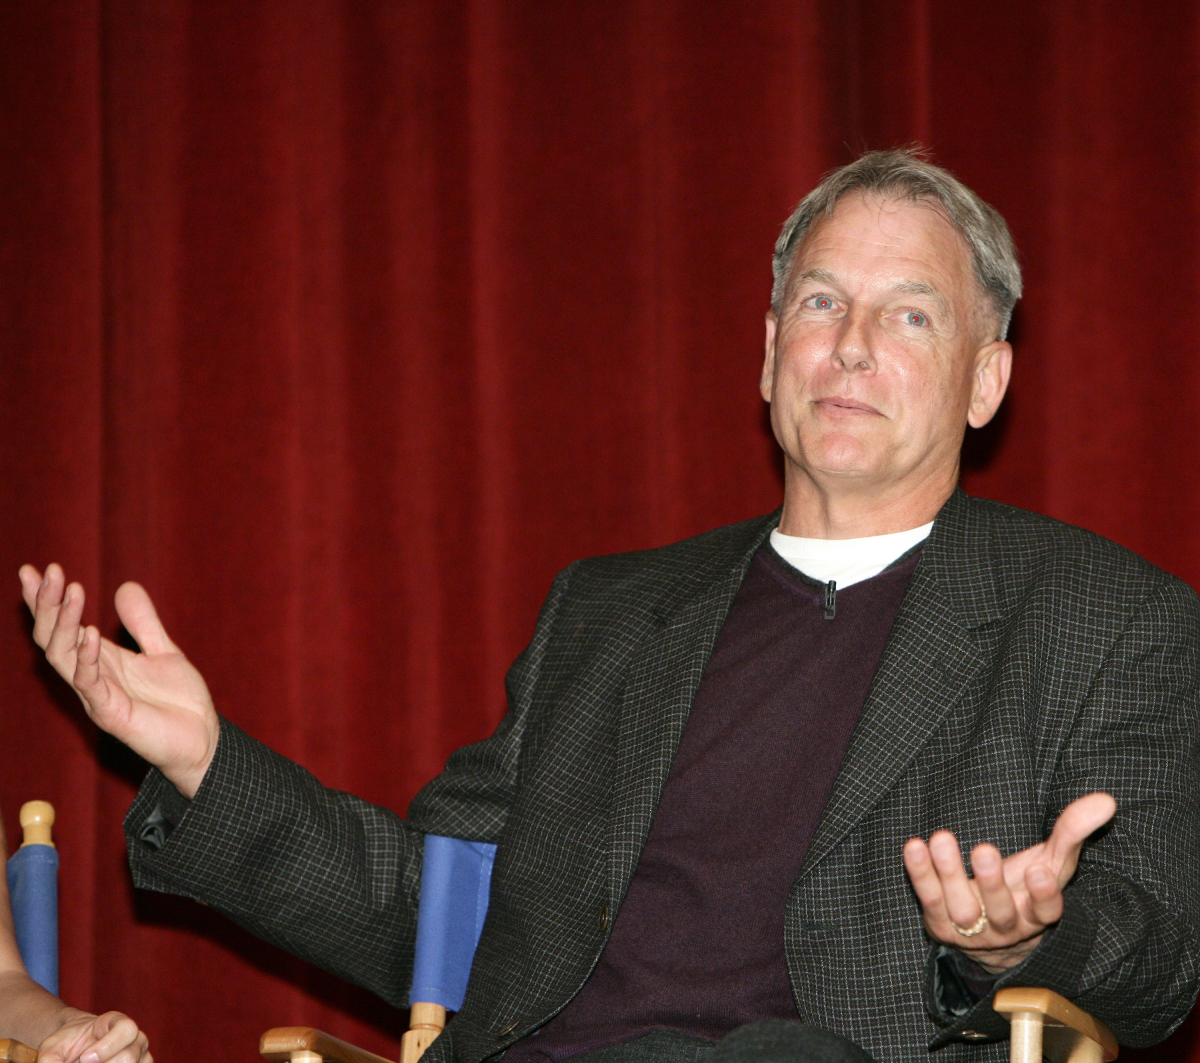 Mark Harmon during CBS Paramount Network Television presents "For Your Consideration" screening of NCIS in 2006